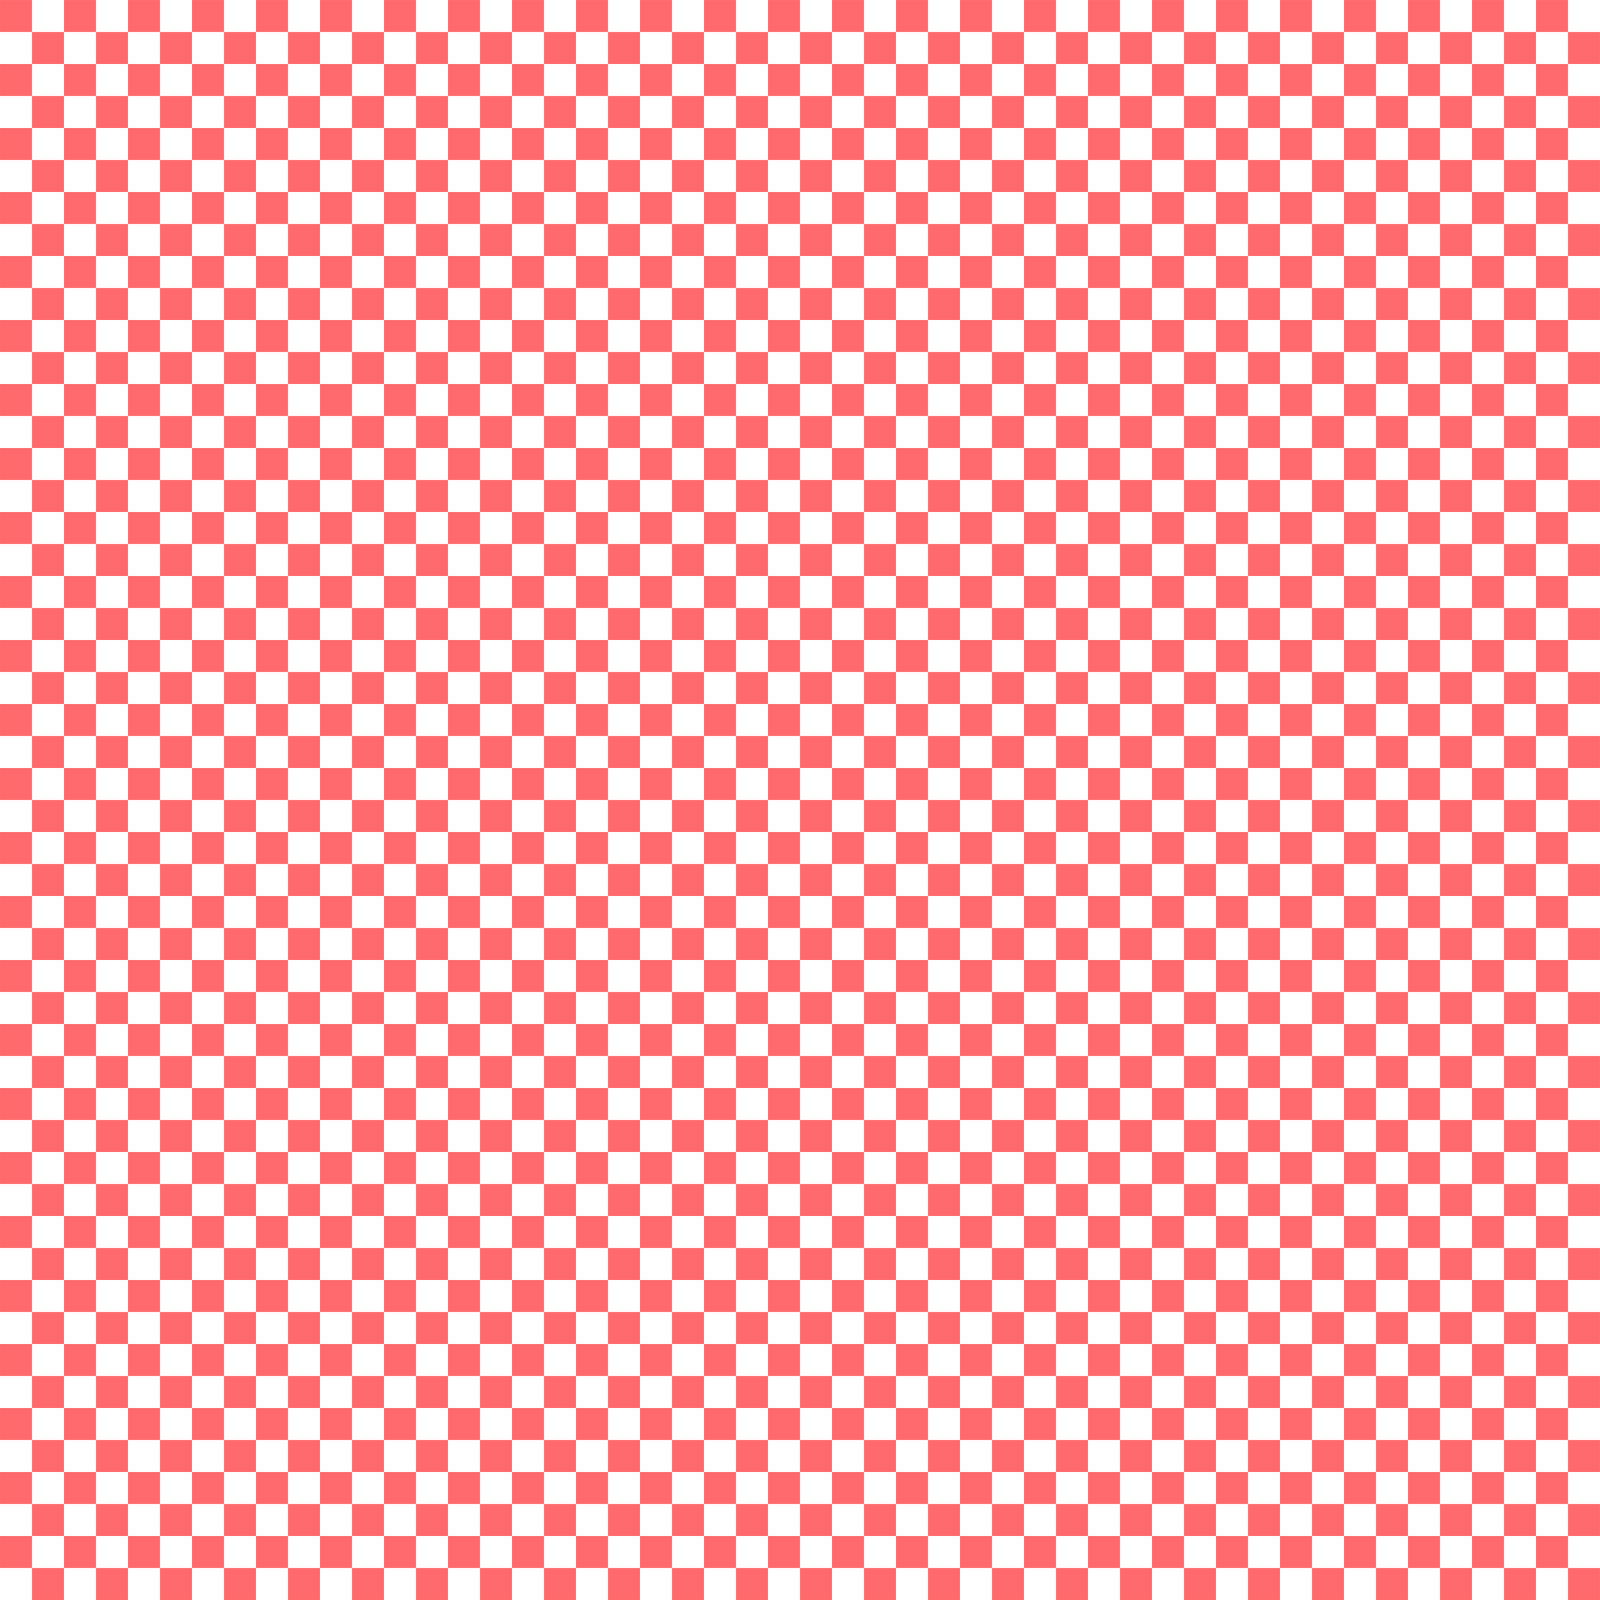 Free download red and white checkerboard pattern [1600x1600] for